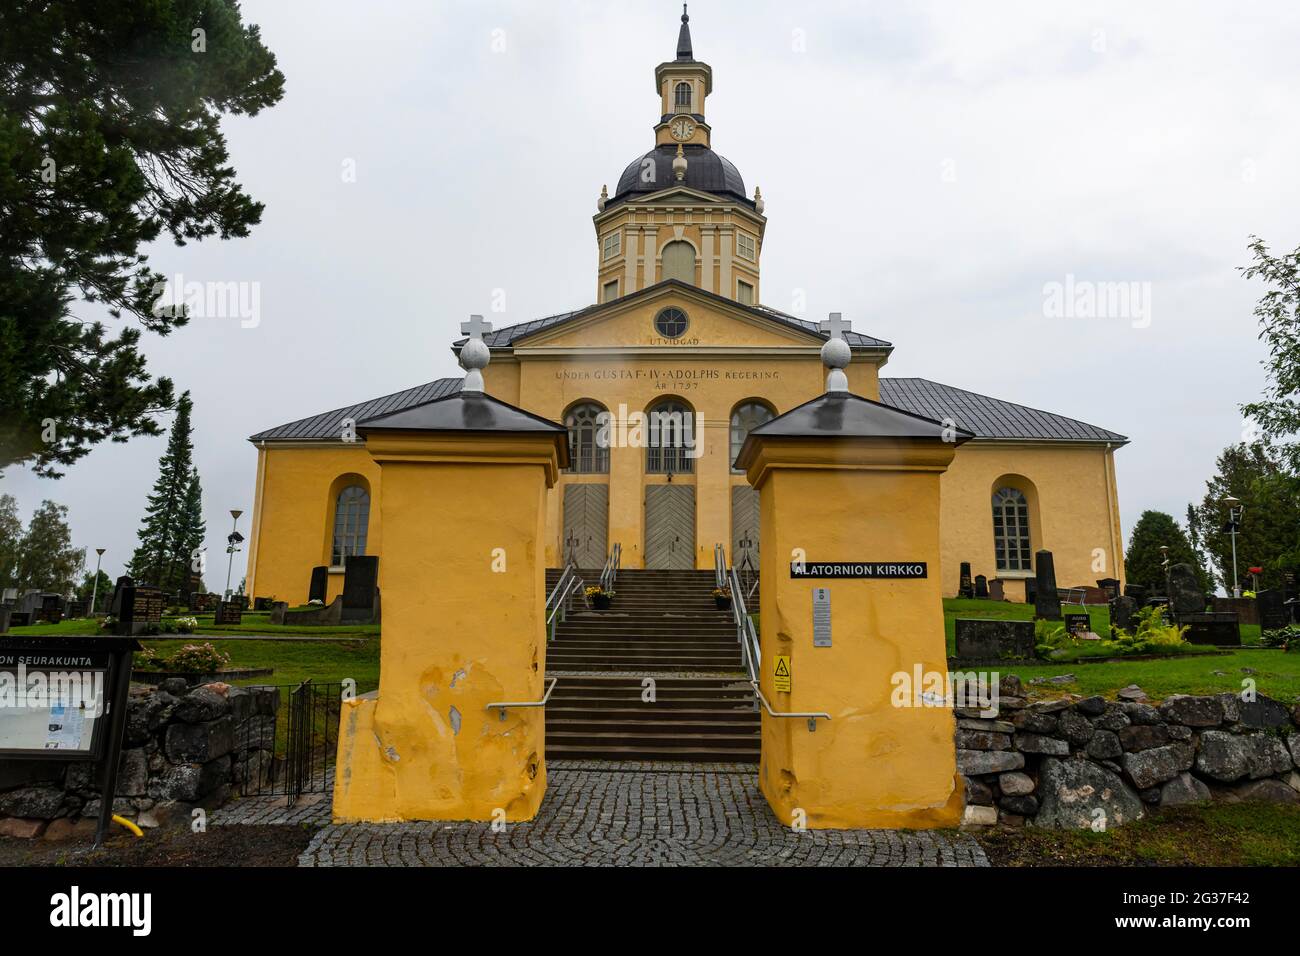 The Alatornio church exterior in and a point in the Unesco world heritage site Struve Geodetic Arc, Kermi, Finland Stock Photo